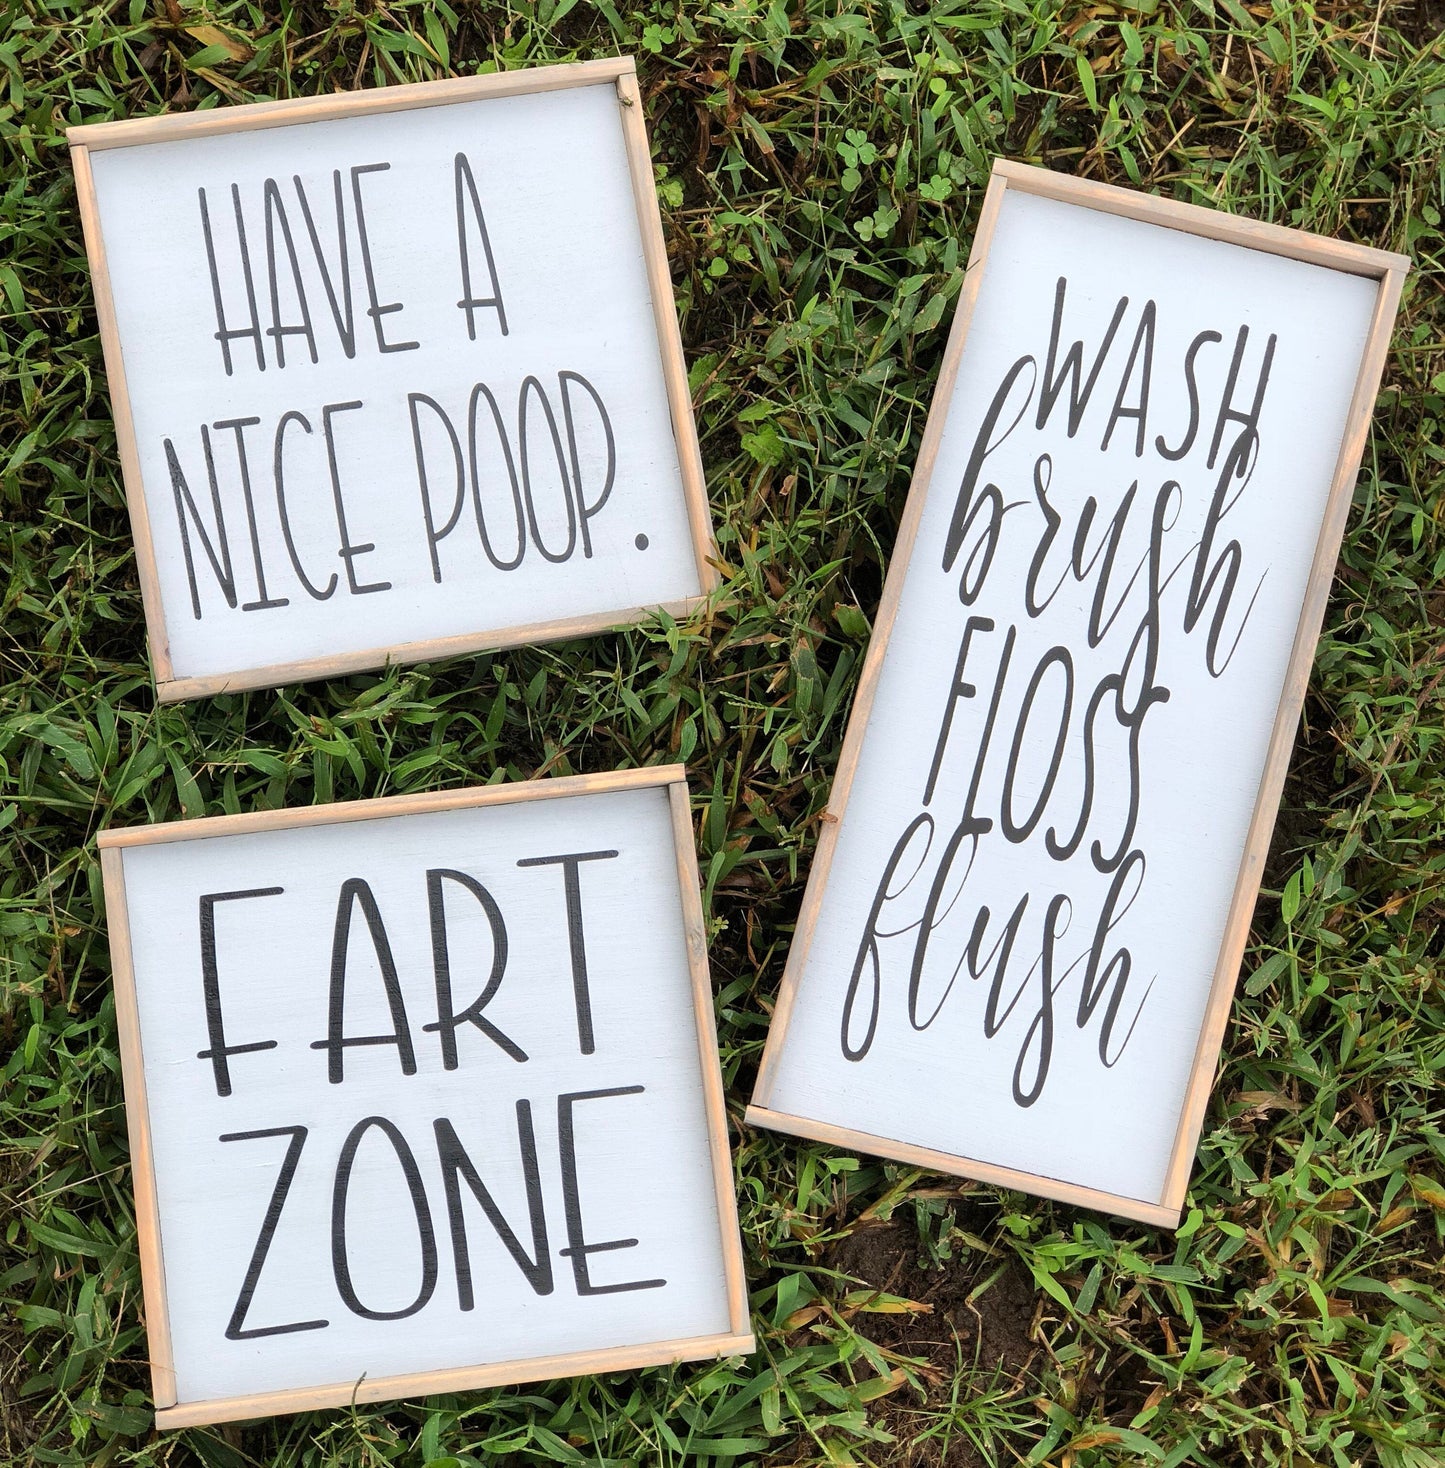 Wash Brush Floss Flush | Have A Nice Poop | Fart Zone